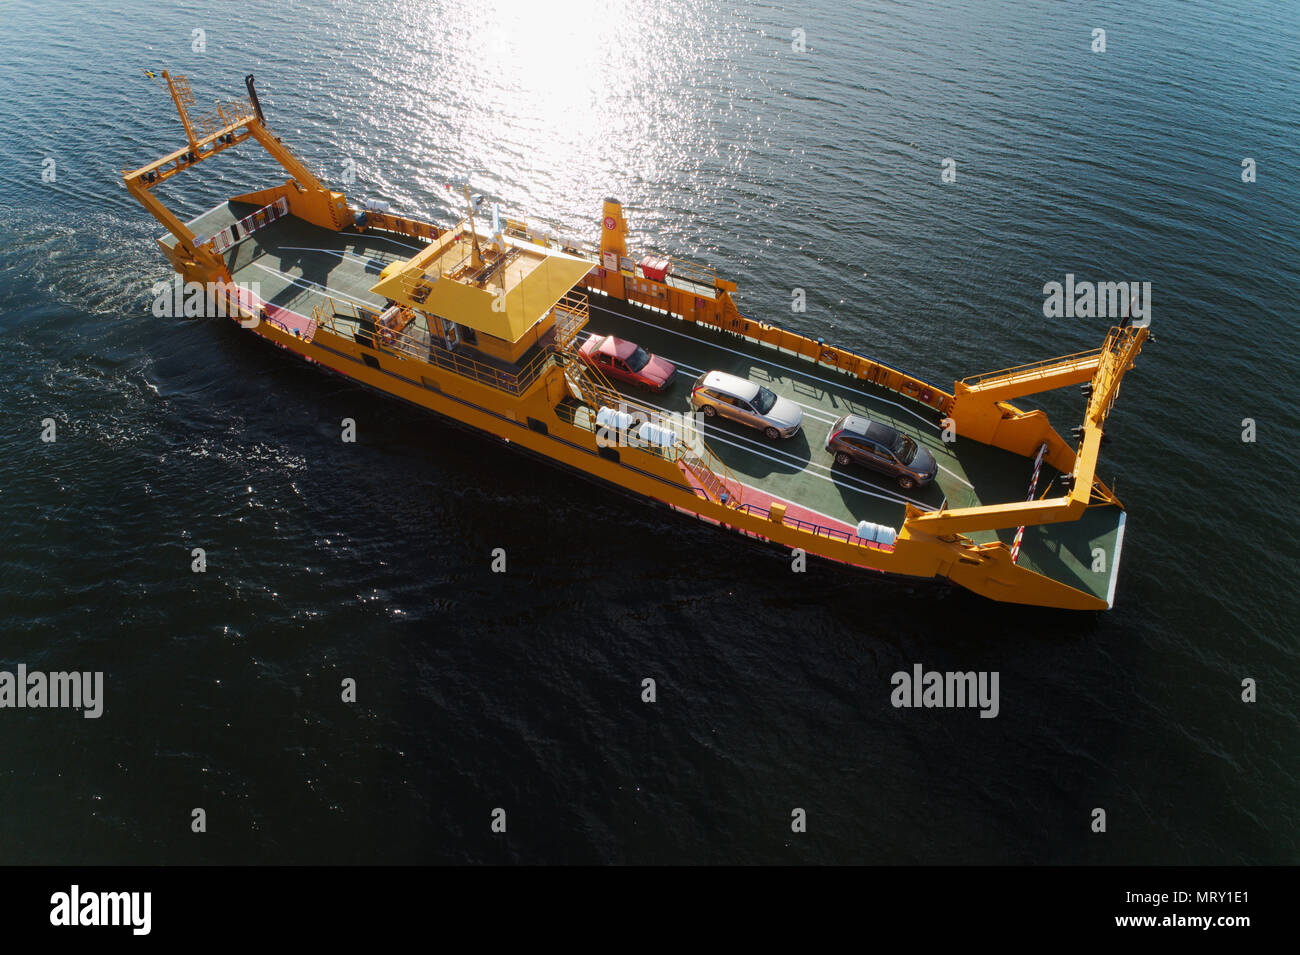 Horningsnas, Sweden - May 22, 2018: Aerial view of a yellow road ferry operateded by the Swedish Transport Administration (Trafikverket)  as part of t Stock Photo